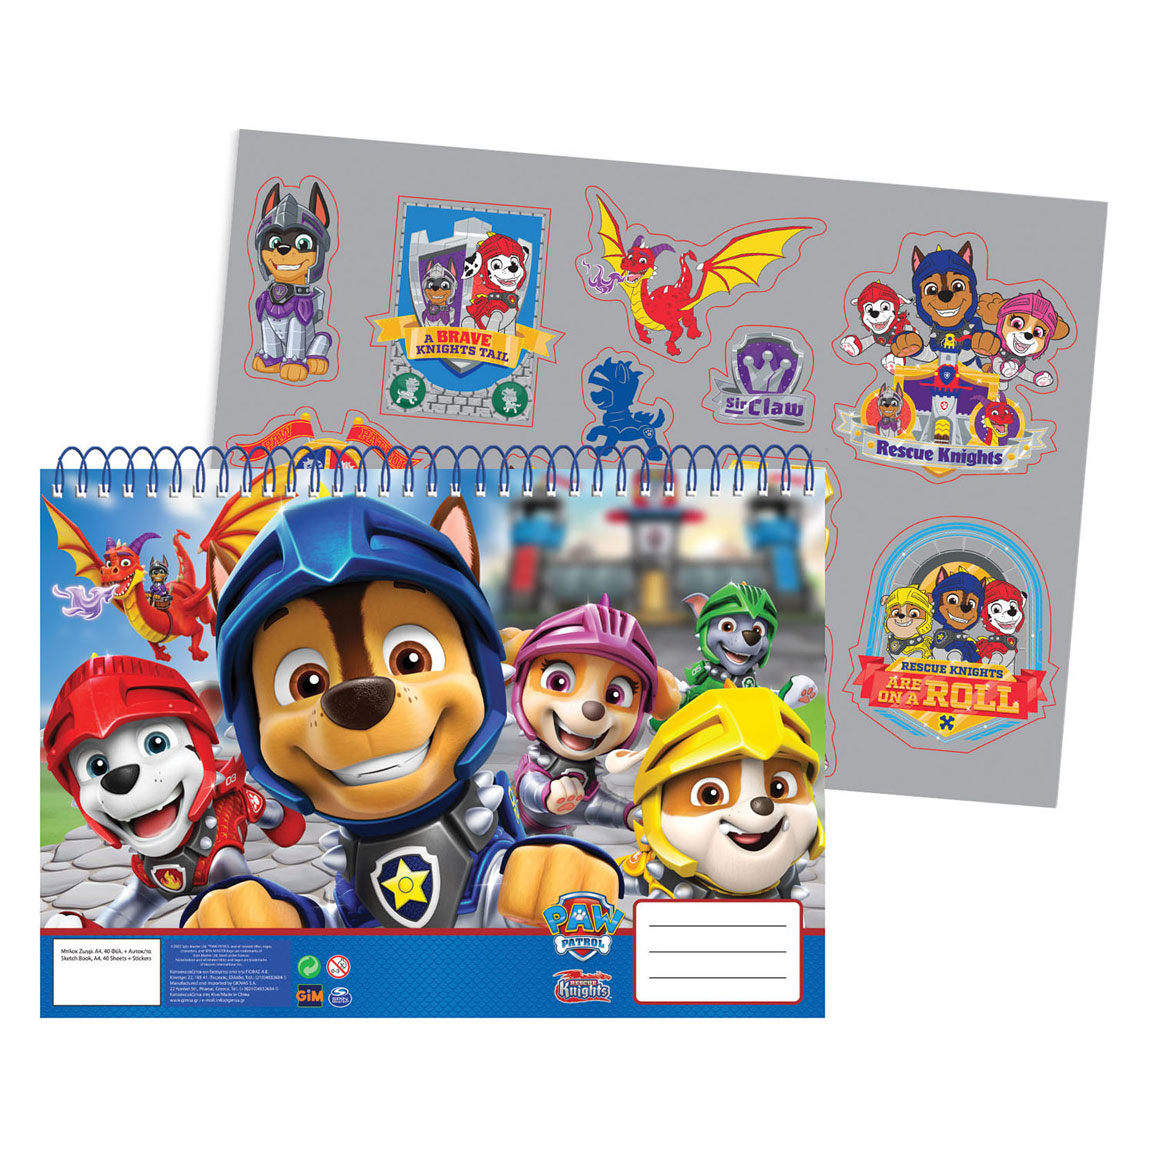 Amazon.com: LEXiBOOK Paw Patrol Multicolor Magic Magnetic Drawing Board,  Artistic Creative Toy for Girls and Boys, Stylus Pen and Stamps, Red/Blue,  CRPA550 : Toys & Games